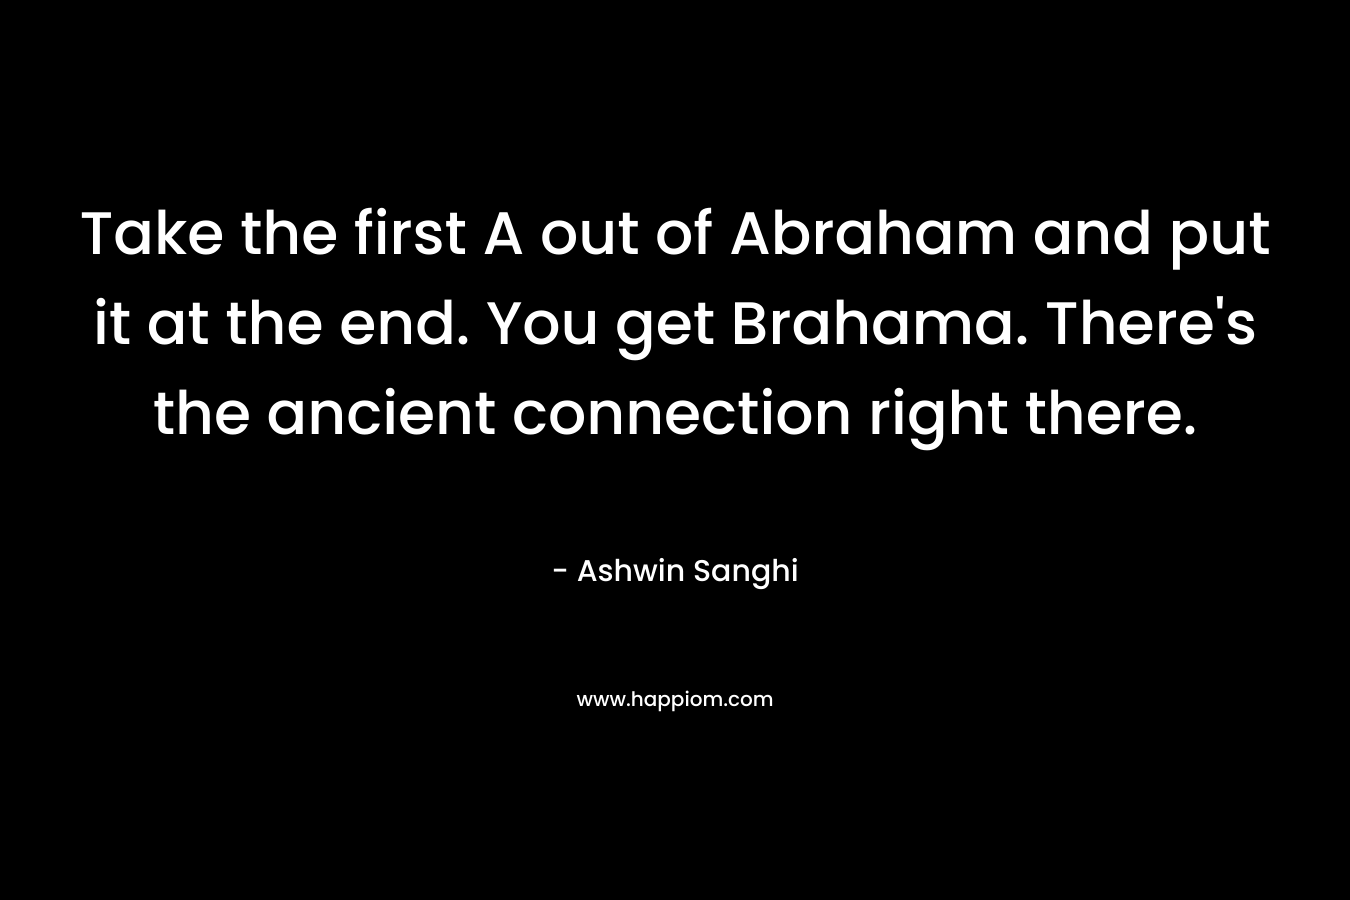 Take the first A out of Abraham and put it at the end. You get Brahama. There’s the ancient connection right there. – Ashwin Sanghi